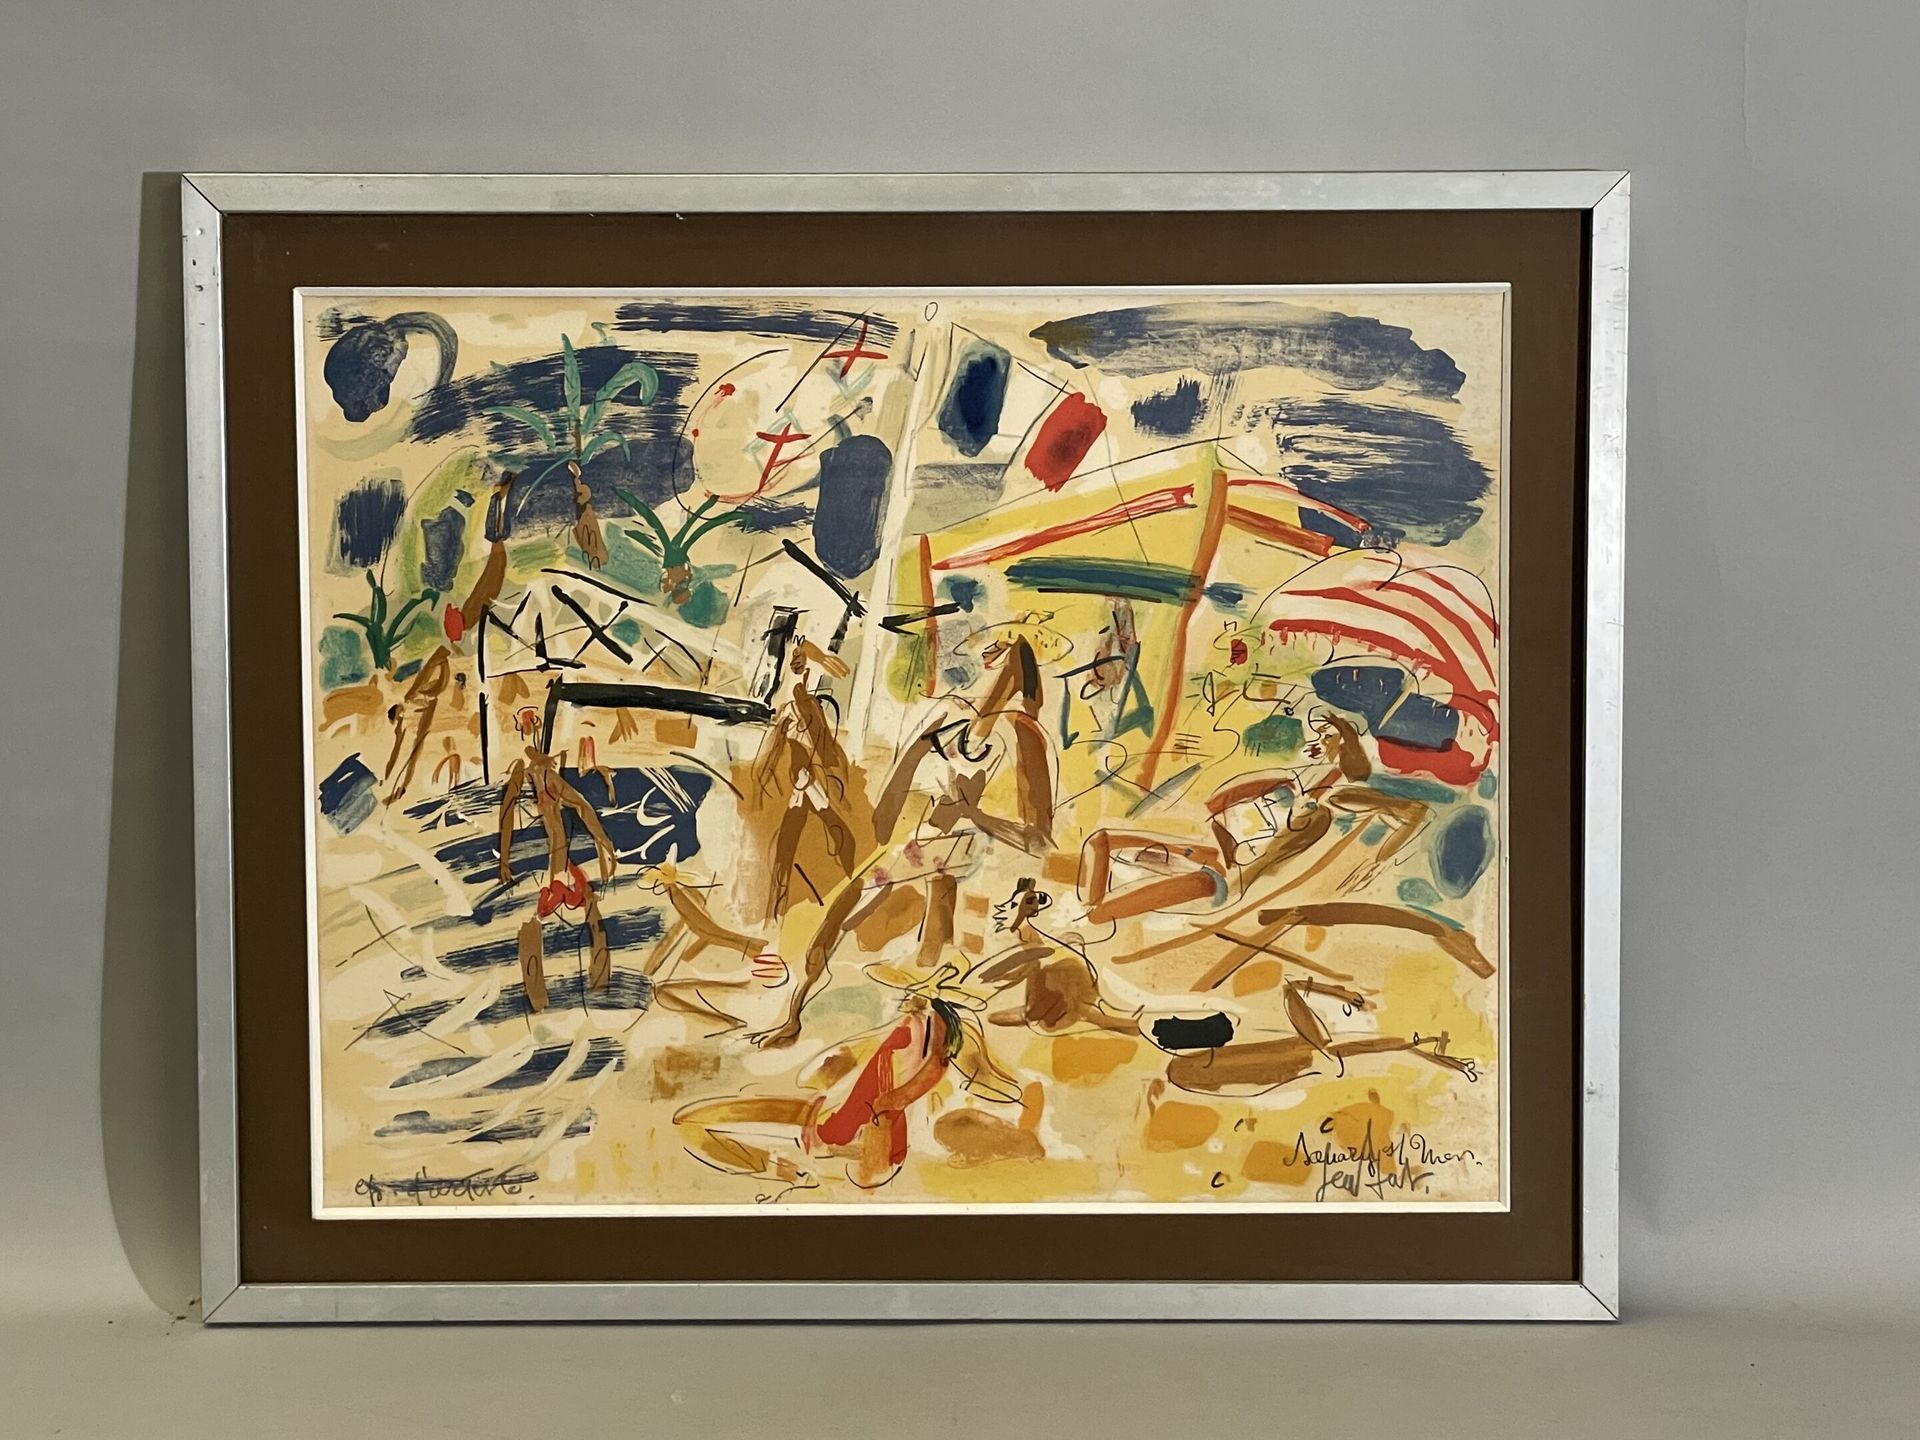 Null GEN PAUL (1895-1975)
Sanary sur Mer
Lithograph in colors framed. 
Signed an&hellip;